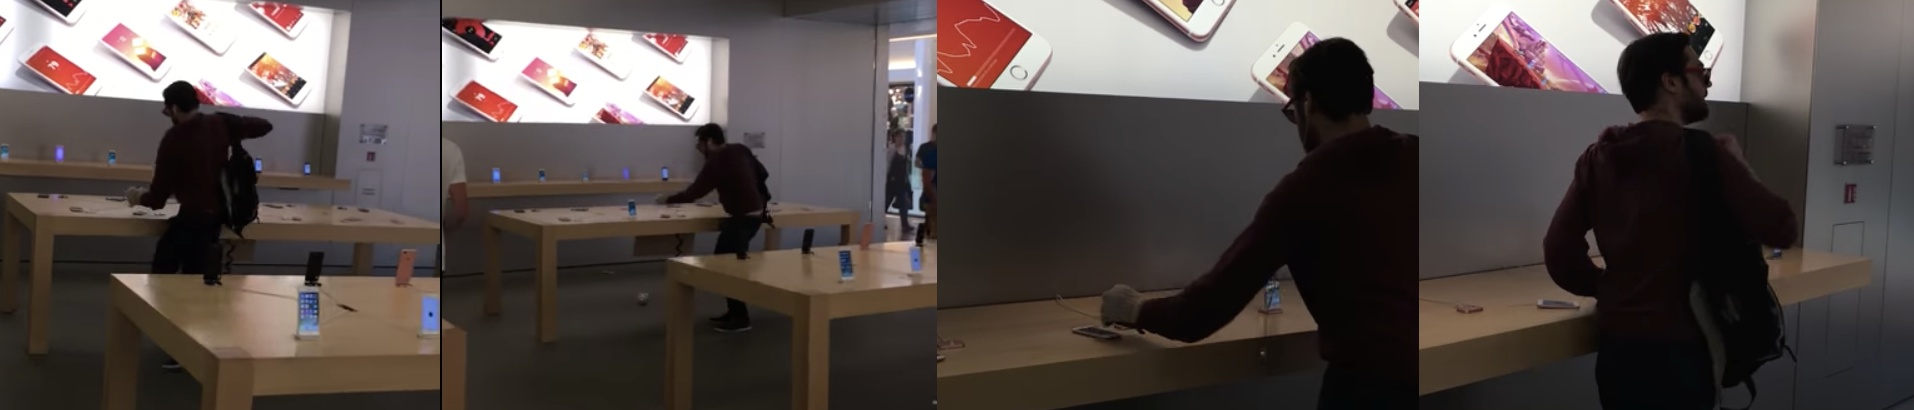 Man Smashes Apple Store Merchandise, Yelling About Consumer Rights